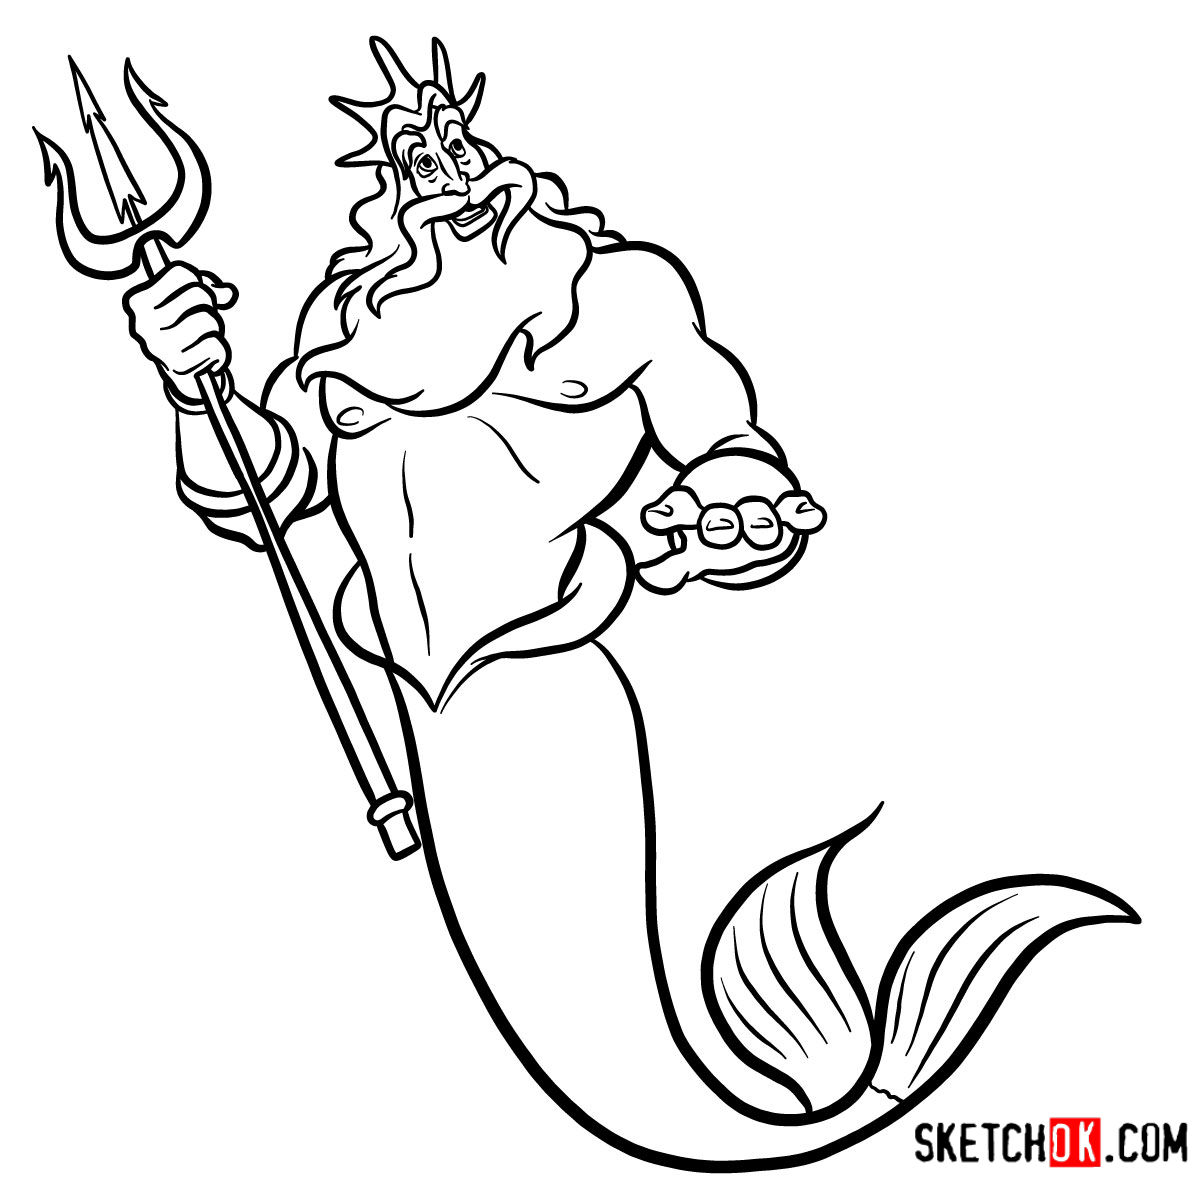 How to draw King Triton | The Little Mermaid